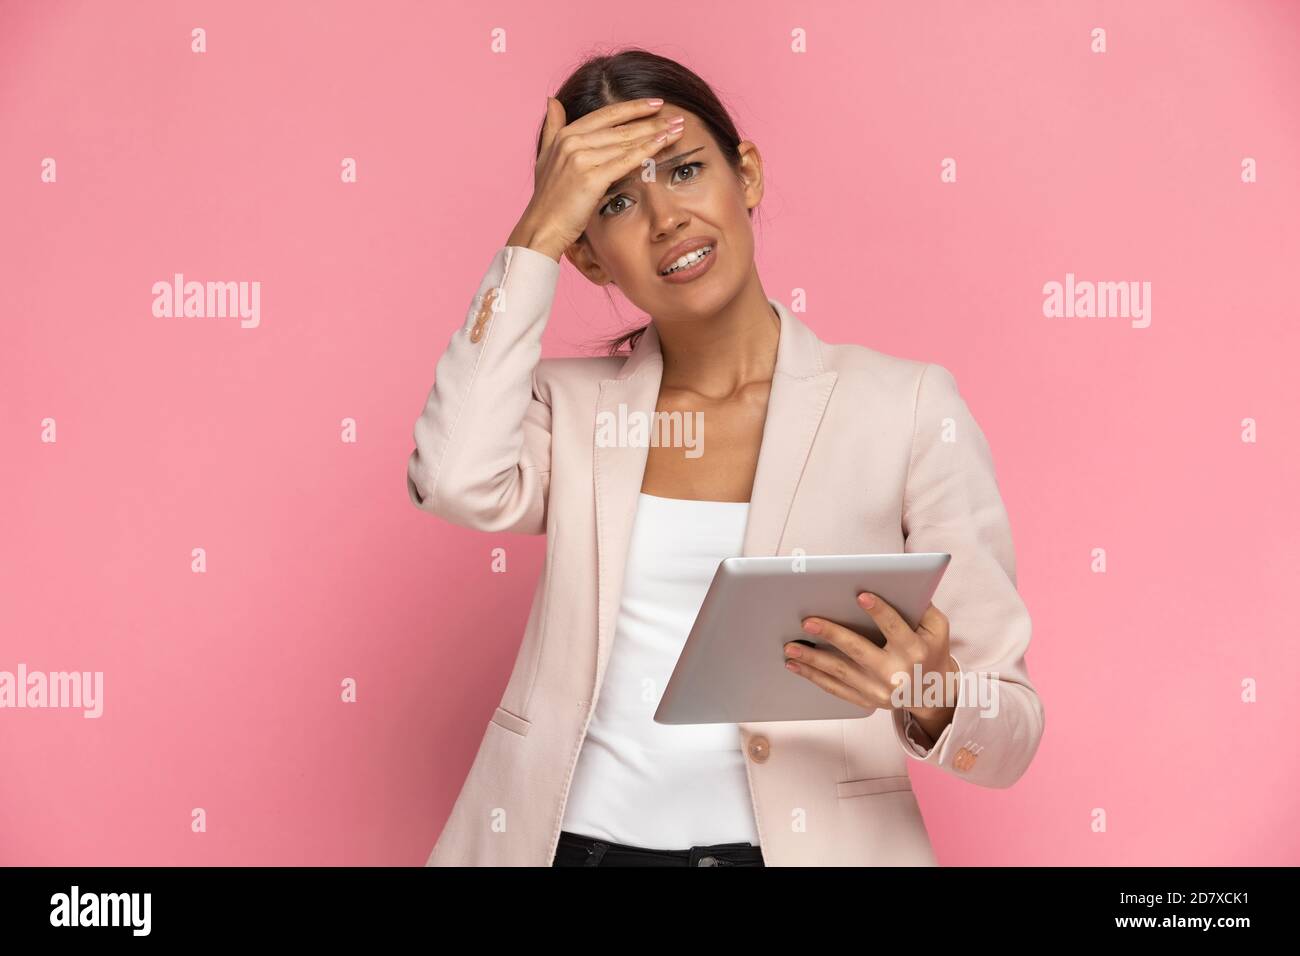 beautiful businesswoman holding her tablet and slapping her face, feeling anxious on pink background Stock Photo